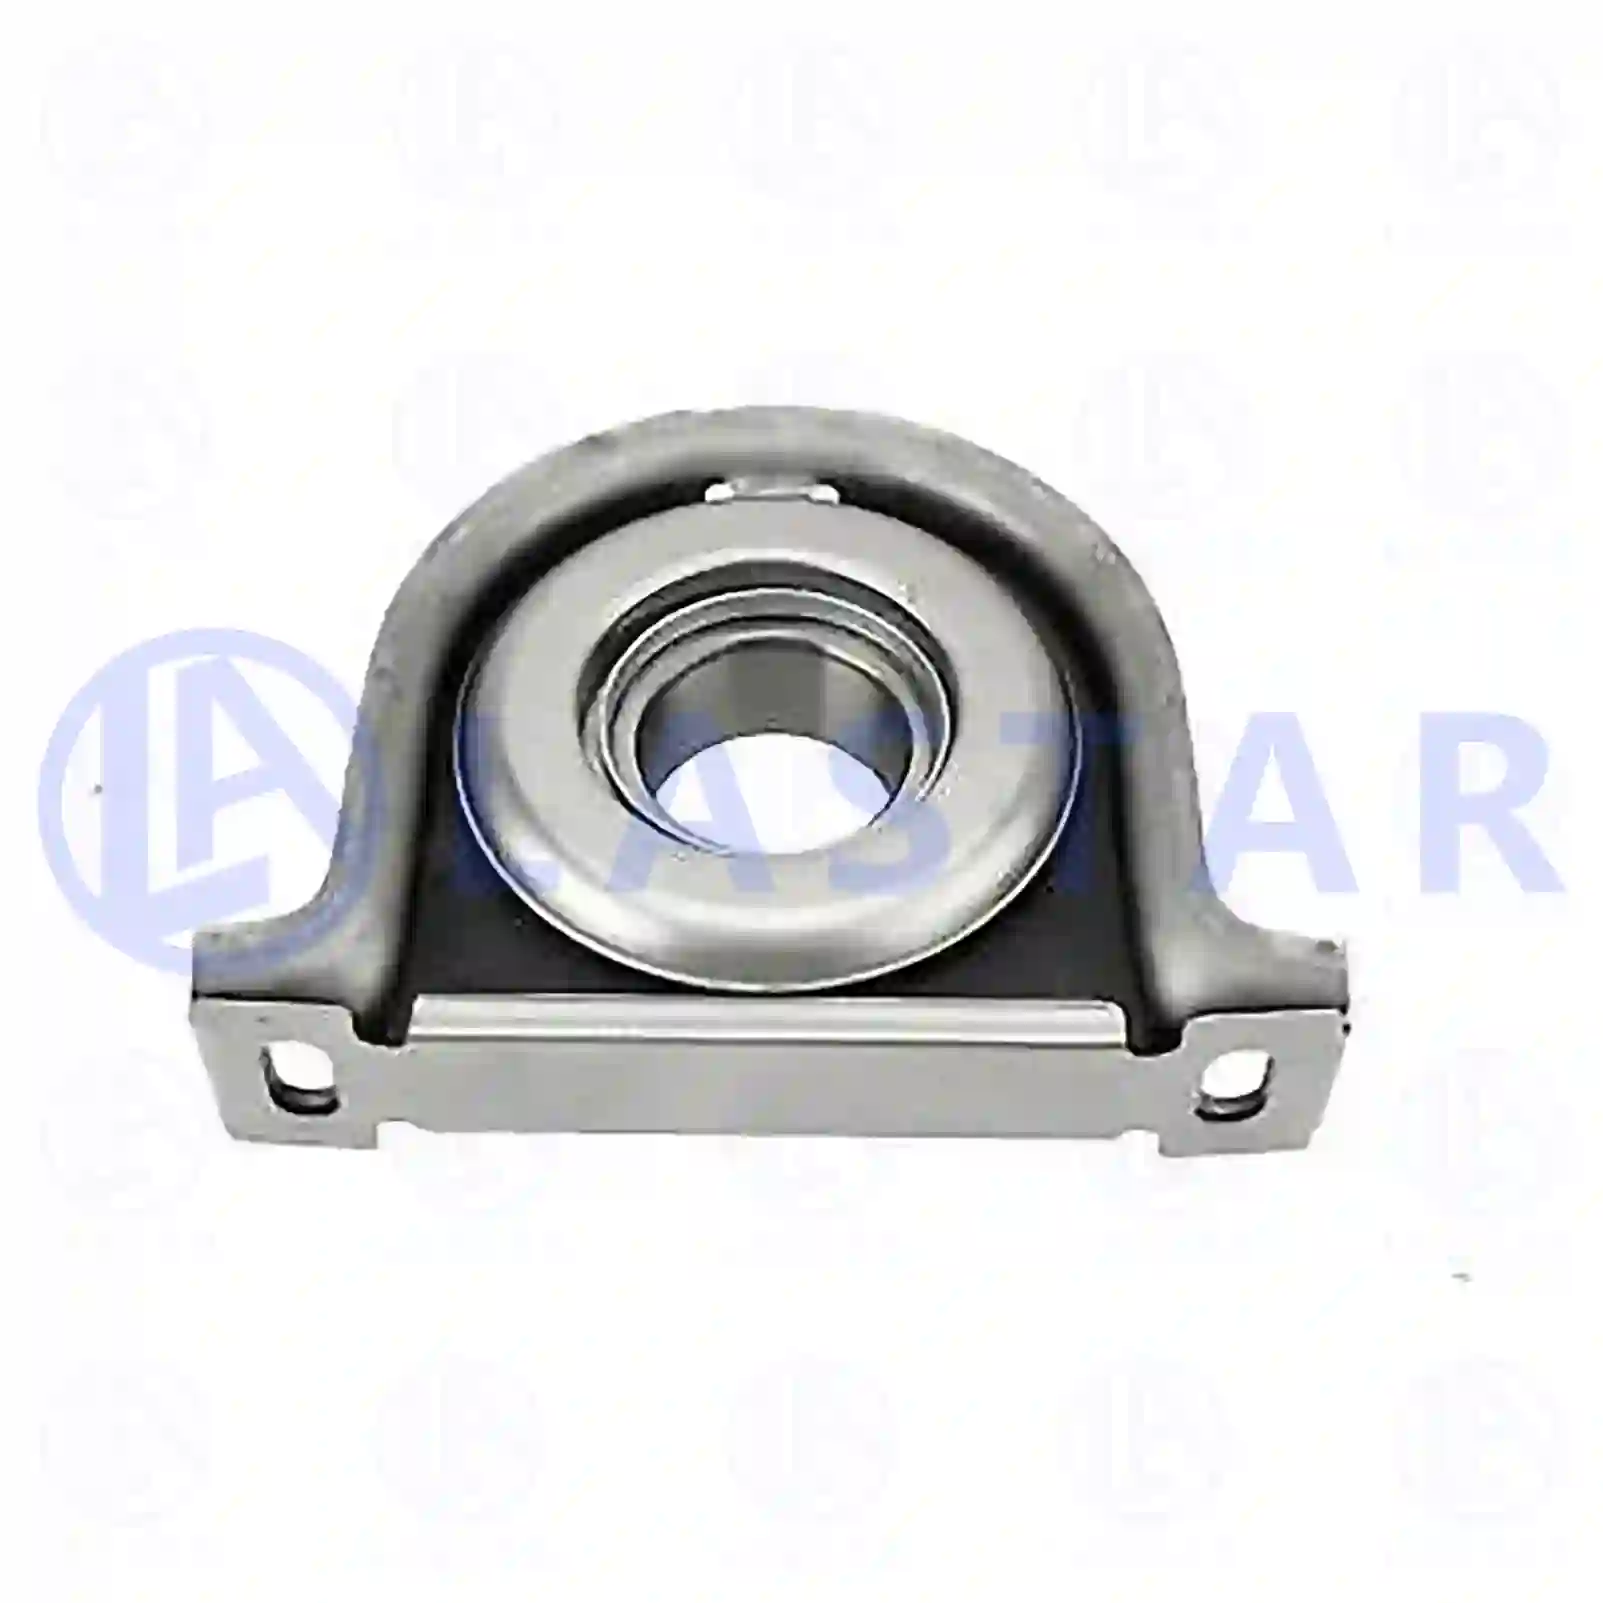 Support Bearing Center bearing, la no: 77734326 ,  oem no:5000820884, 7420876246, 20876246, ZG02497-0008 Lastar Spare Part | Truck Spare Parts, Auotomotive Spare Parts